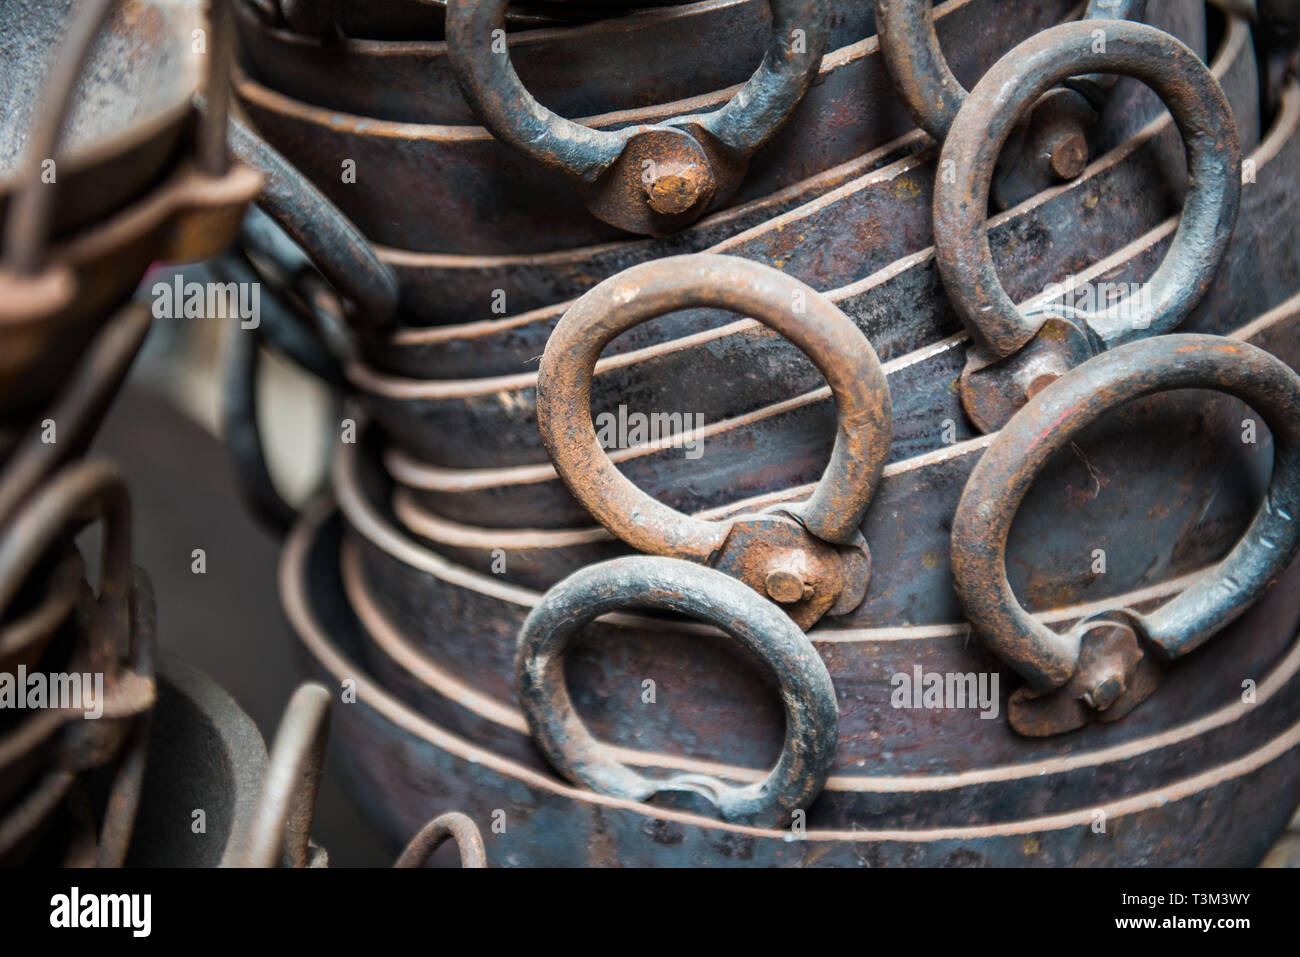 Stack of metal cooking pots for sale at Ason Tol market place Stock Photo